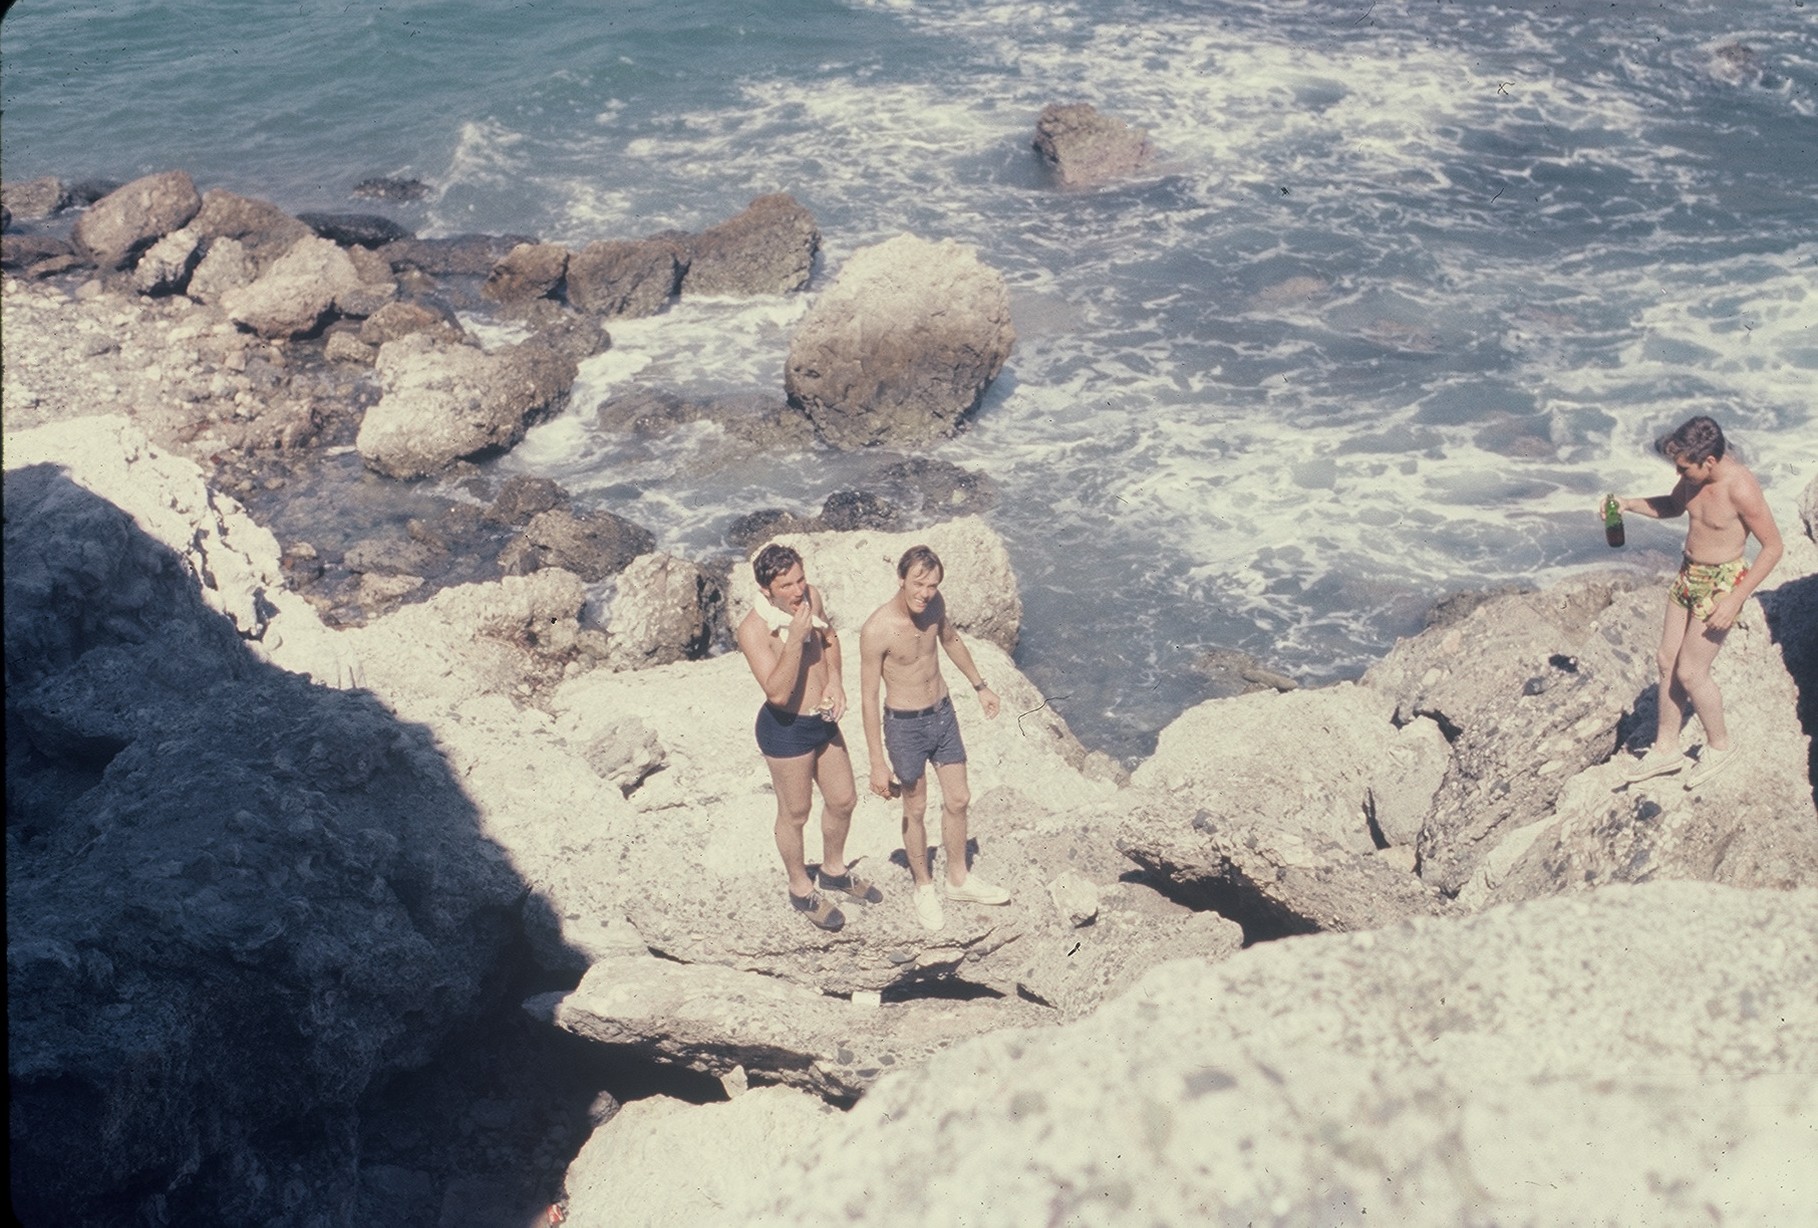 1974 - Snake and Friends at Cuba swimming hole